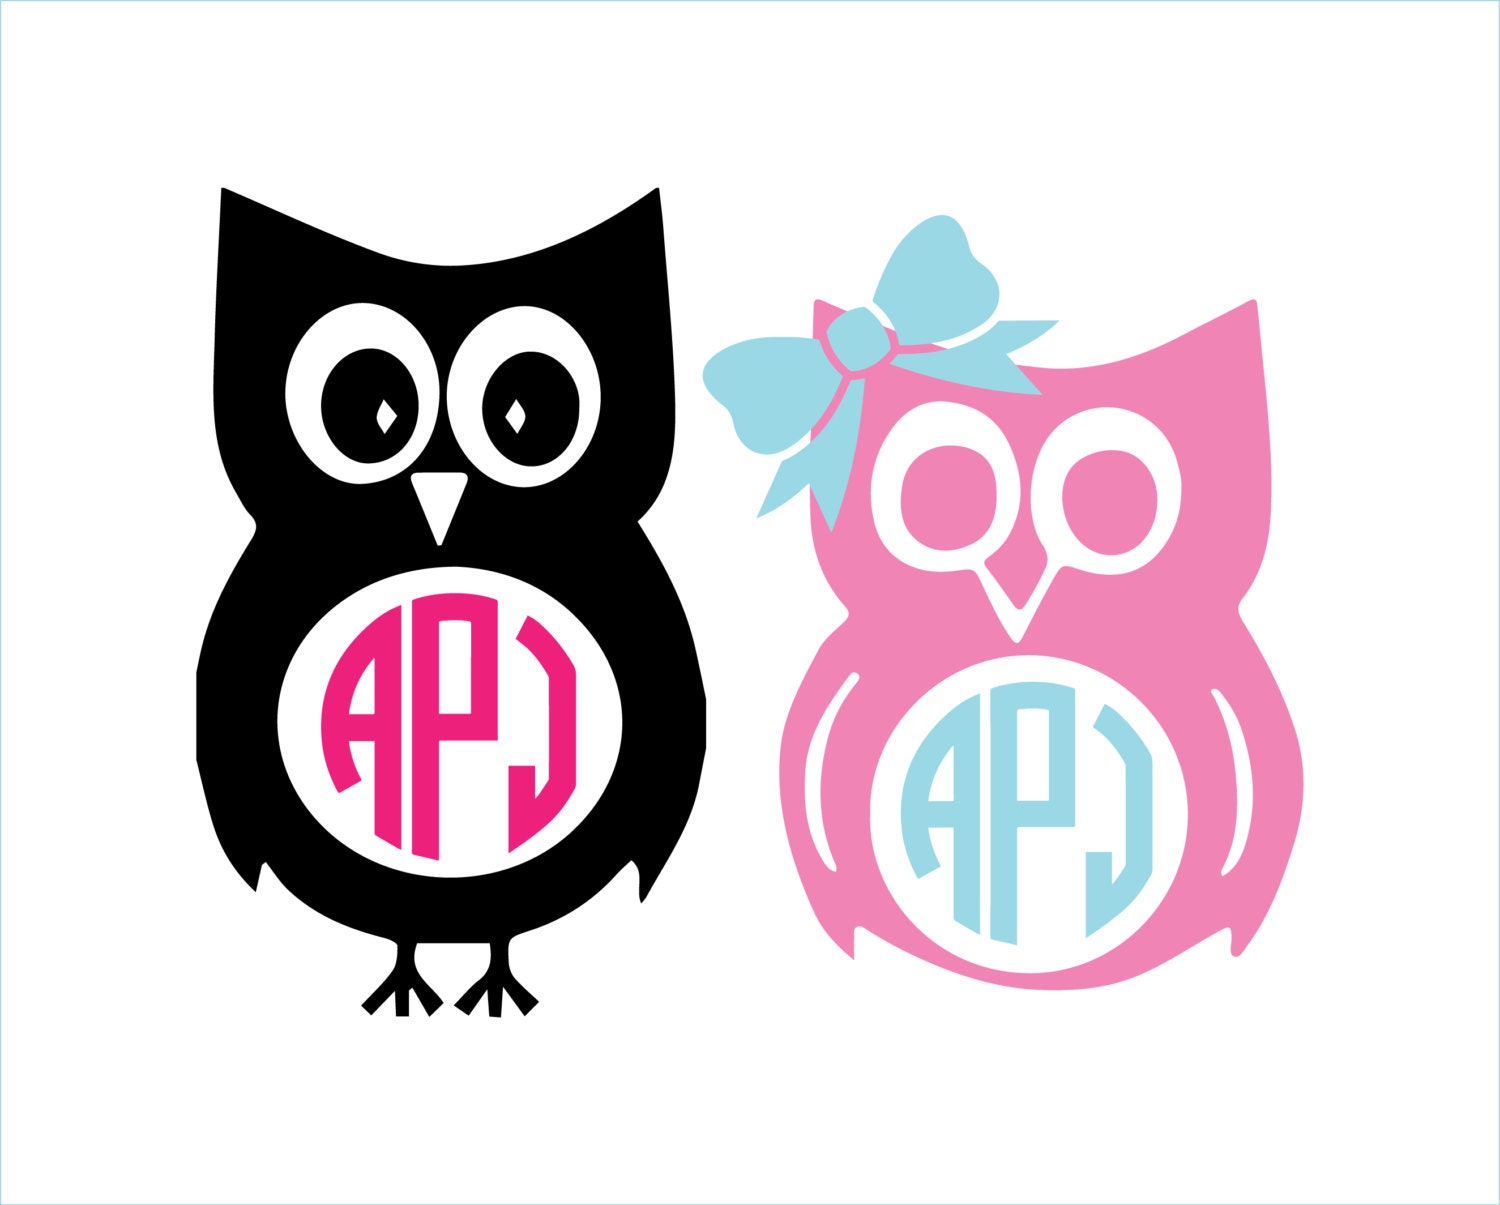 Download Free Owl Monogram Svg : Pin on Cricut Tips - Great for ...